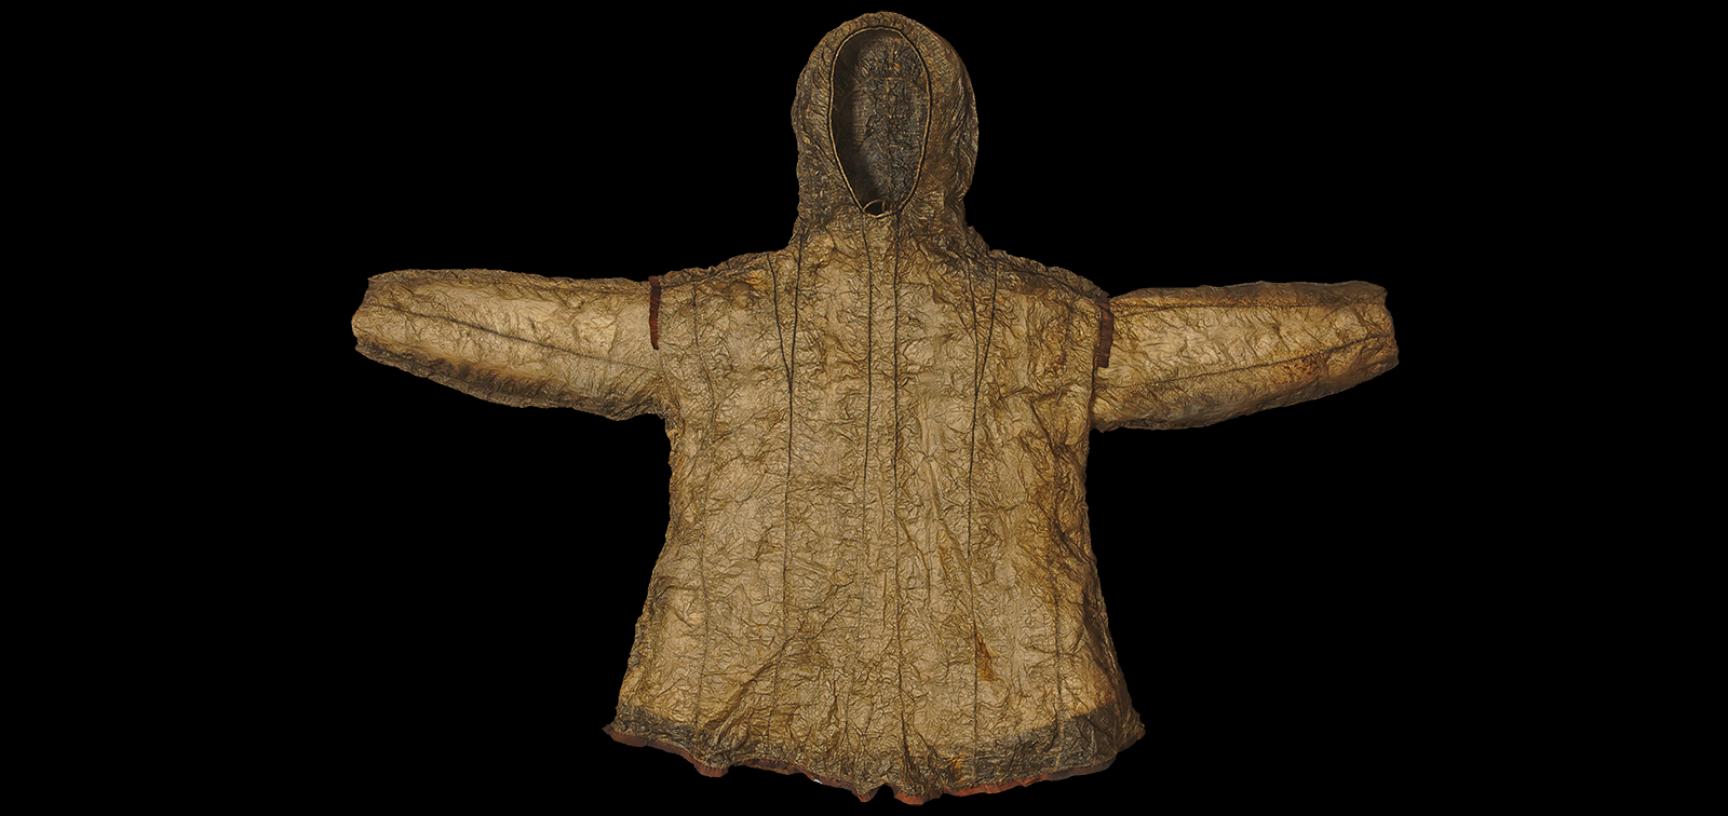 A hooded jacket (1925.11.3) after conservation